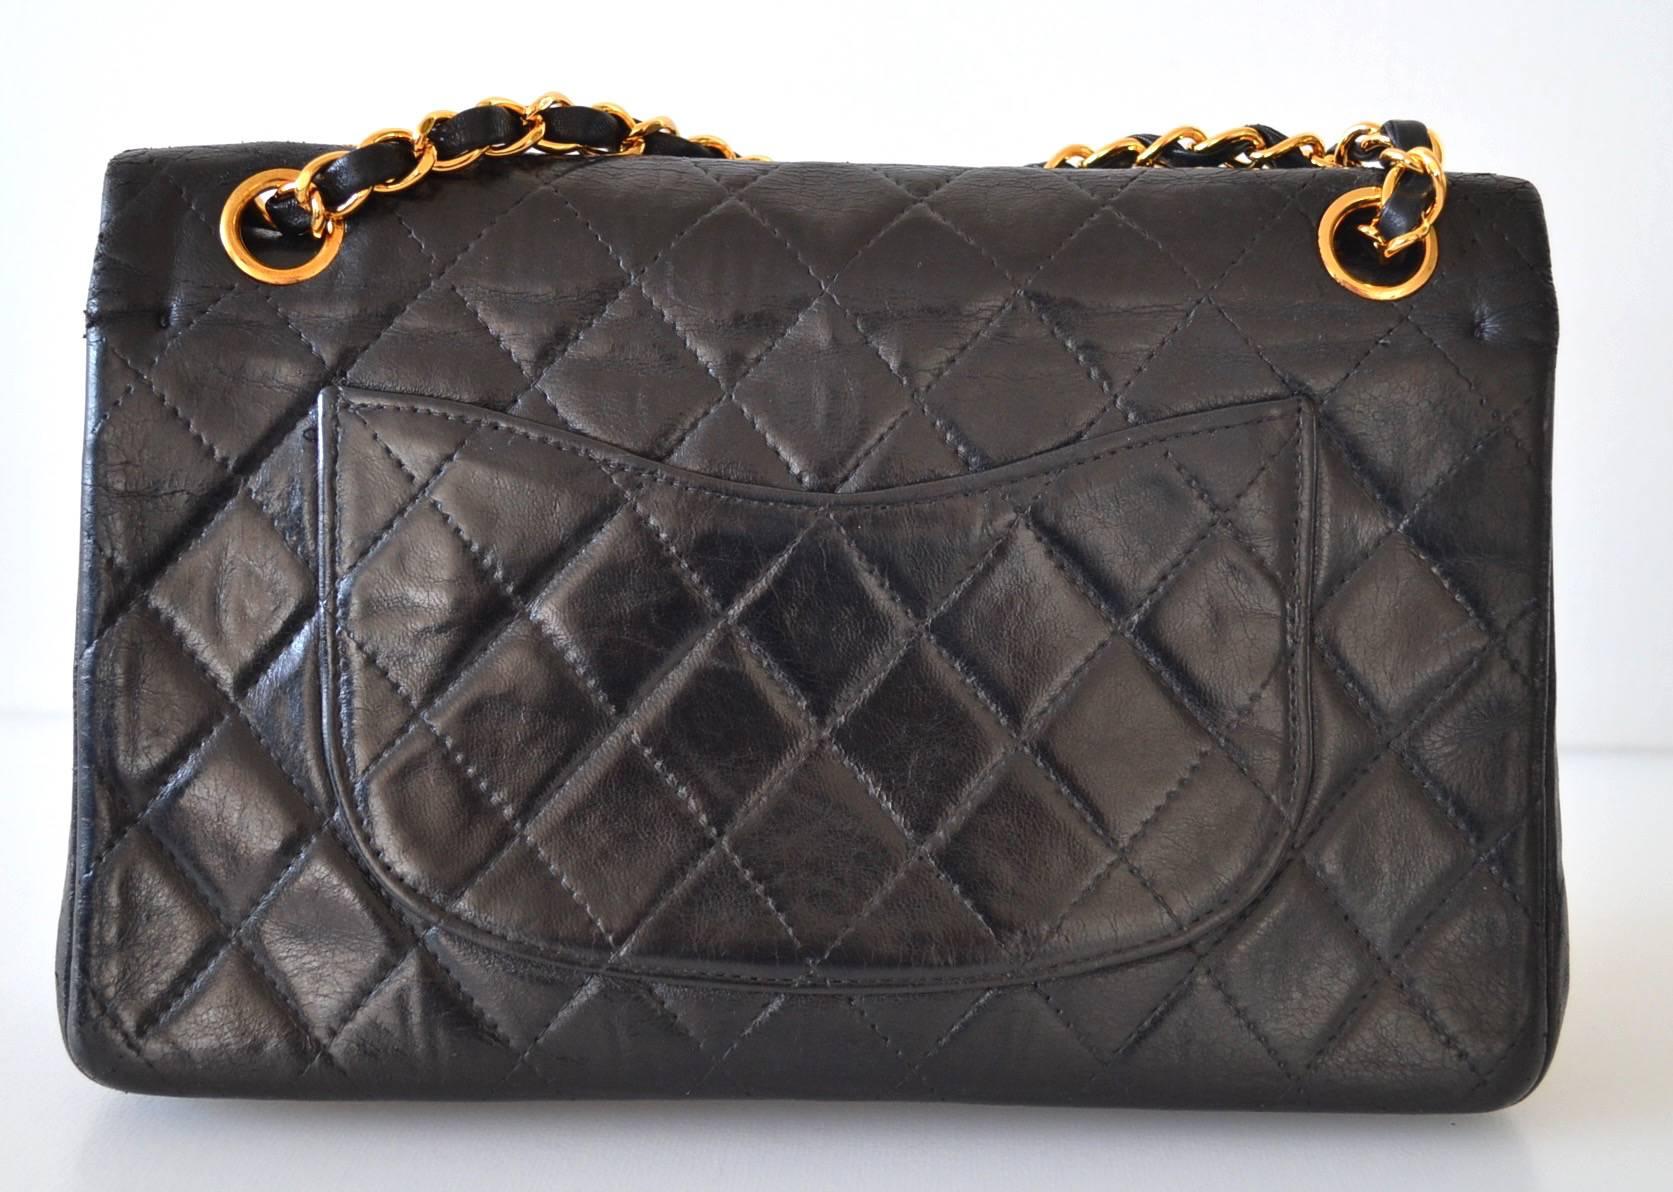 Chanel 2.55 Lamb skin 

Vintage model 

Lamb quilted leather with gold hardware
Clasp 2.55 
Burgundy leather lining with two pockets
This Chanel handbag is in good condition

Chanel Made In France 
1950s

Dimensions : 24 x 16 x 7 cms

